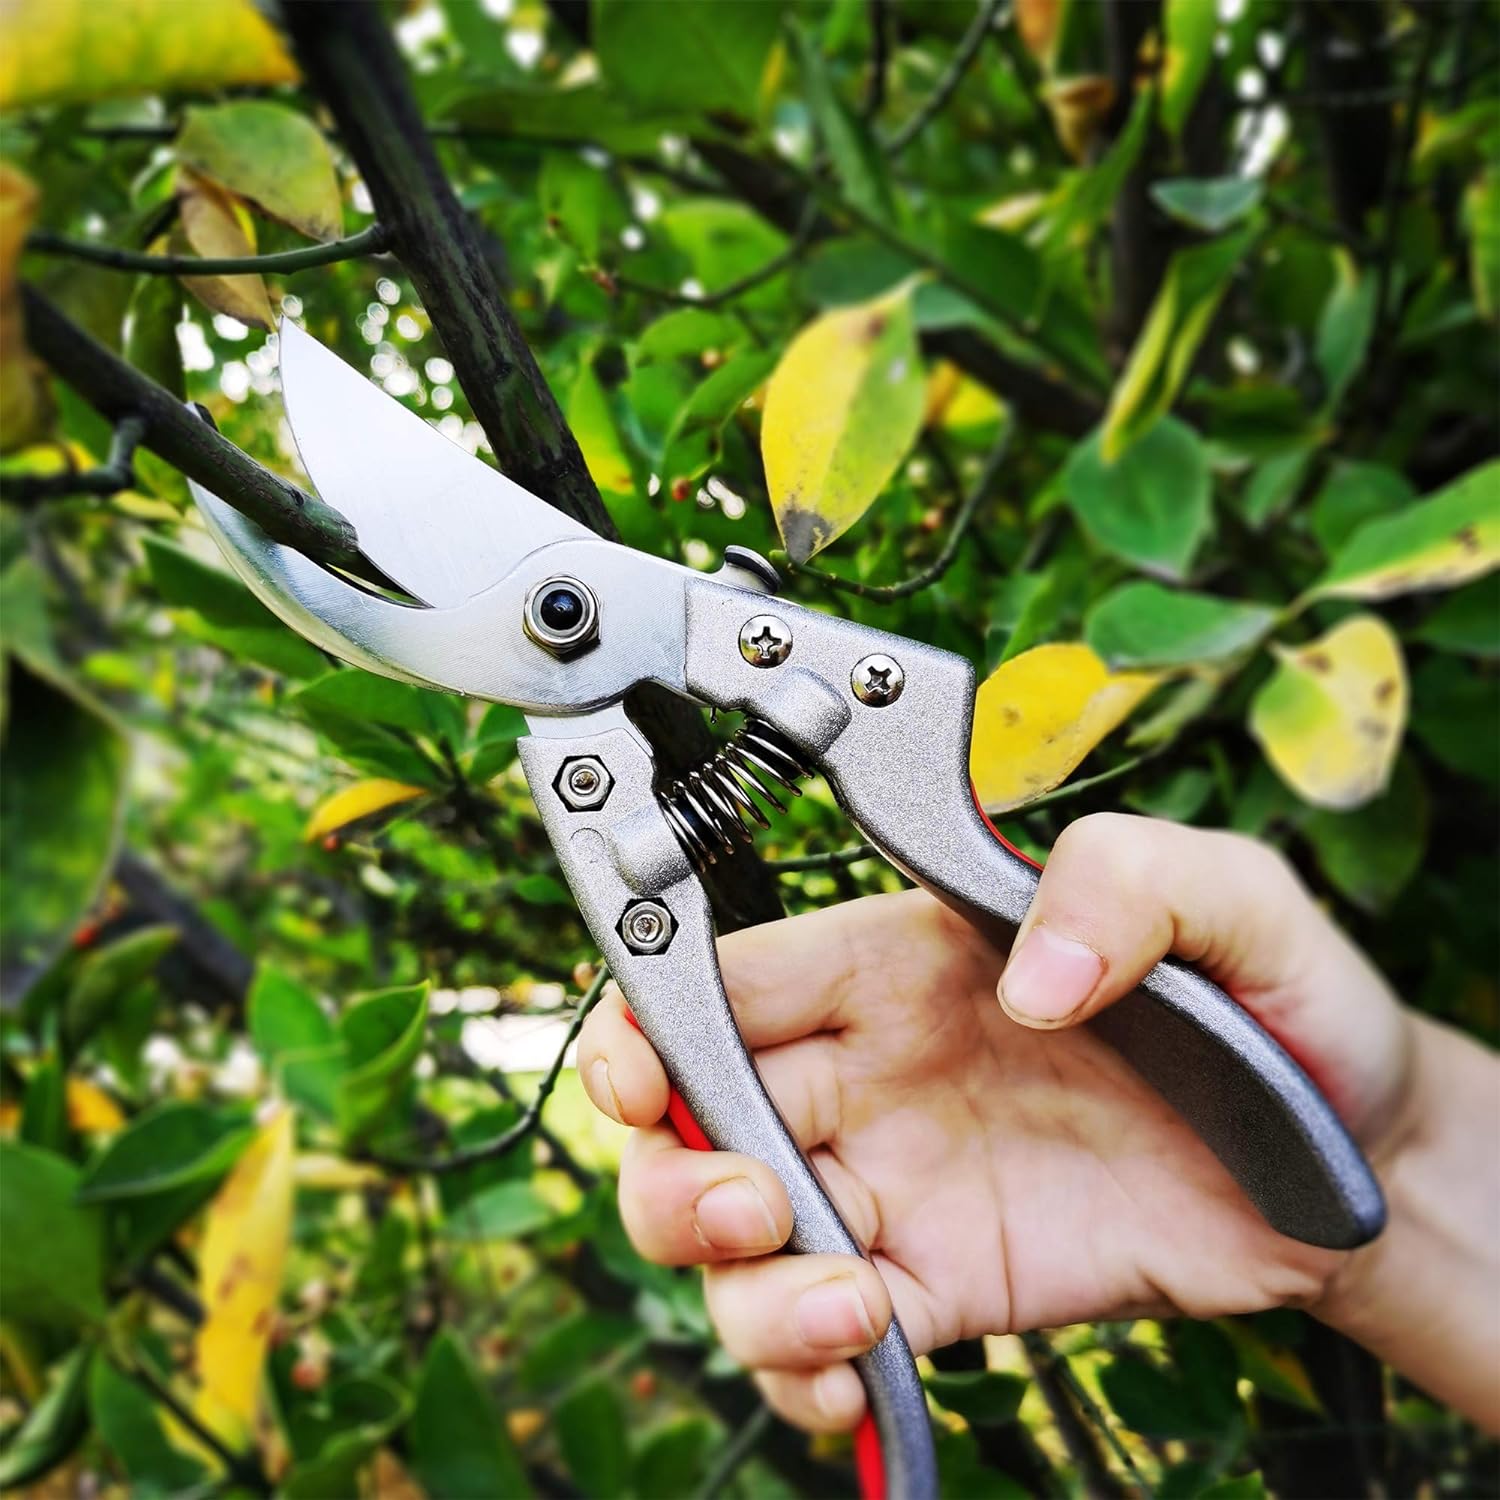  CyberGenZ Anvil Pruning Shears - 8 Garden Shears Pruning,  Heavy Duty Garden Clippers Handheld with Orange Adjustable Grip, Gardening  Pruners Tool for Trimming Plant, Cutting flowers, Cut Up to 3/4 